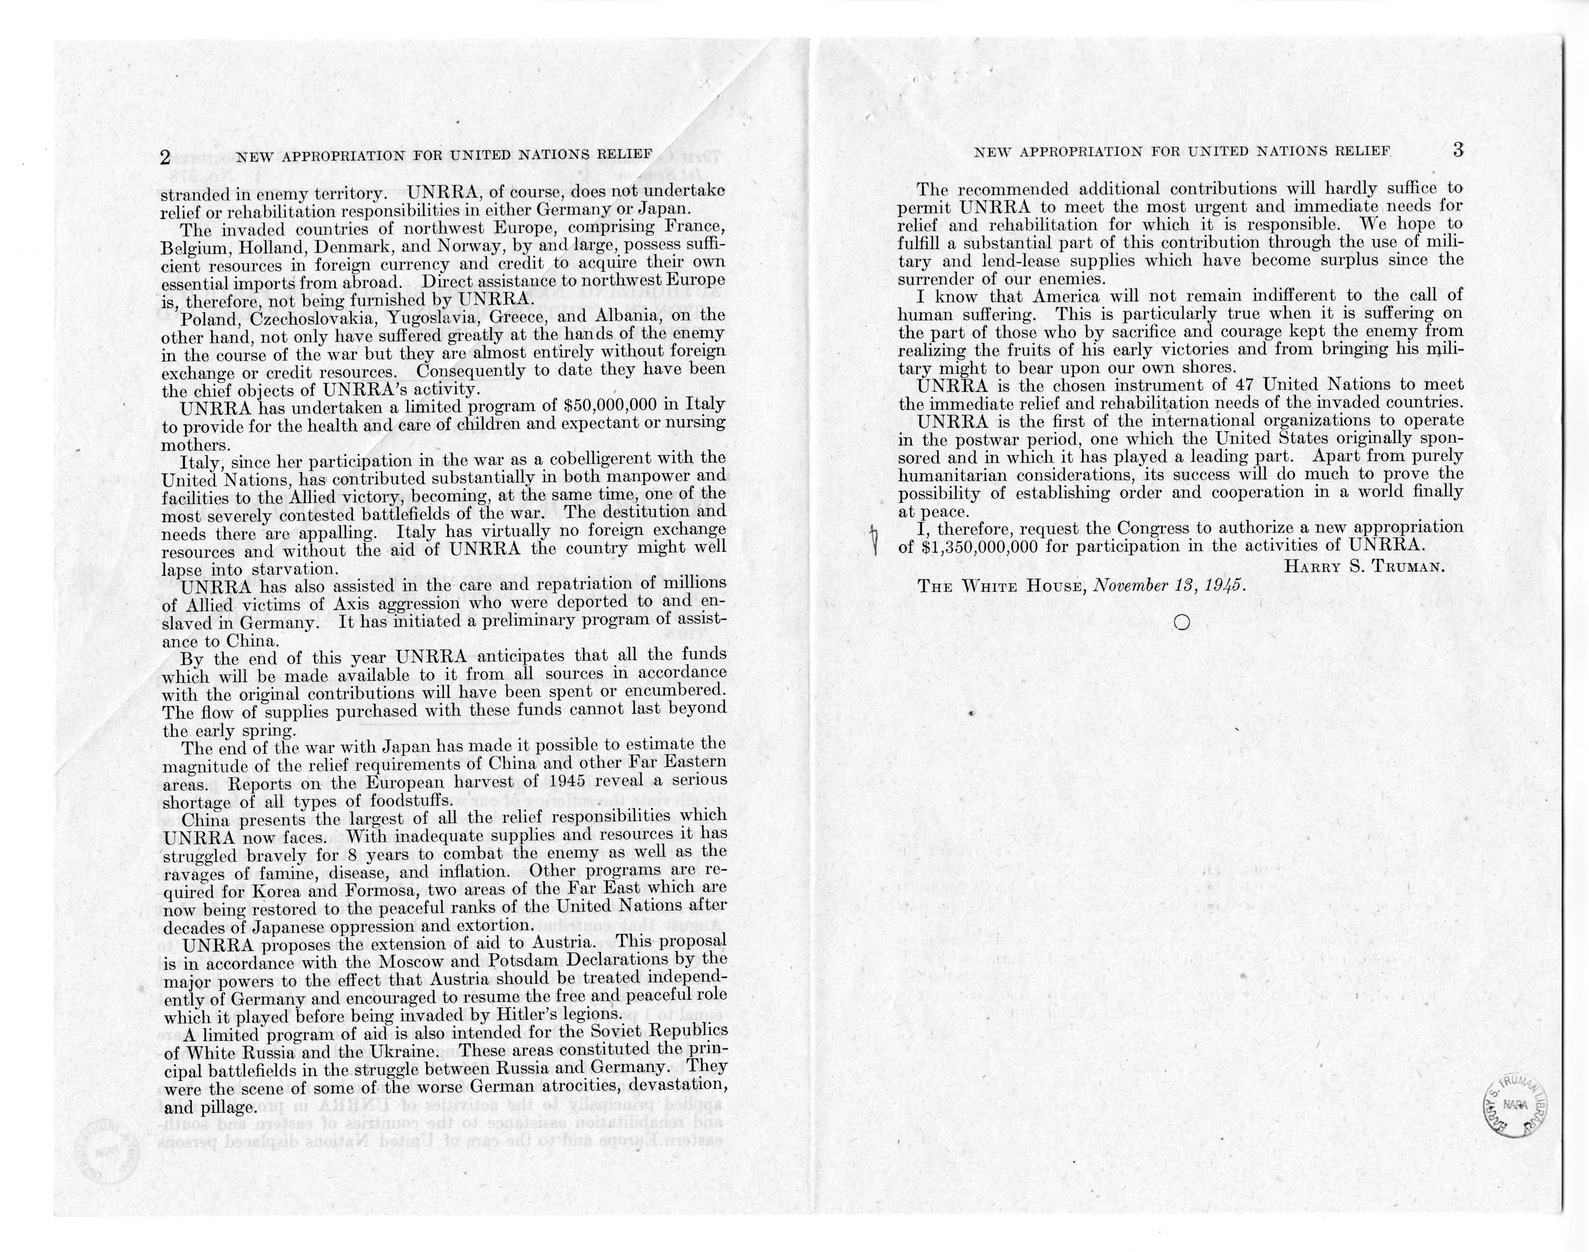 Memorandum from Harold D. Smith to M. C. Latta, H.R. 4649, To Enable the United States to Further Participate in the Work of the United Nations Relief and Rehabilitation Administration, with Attachments